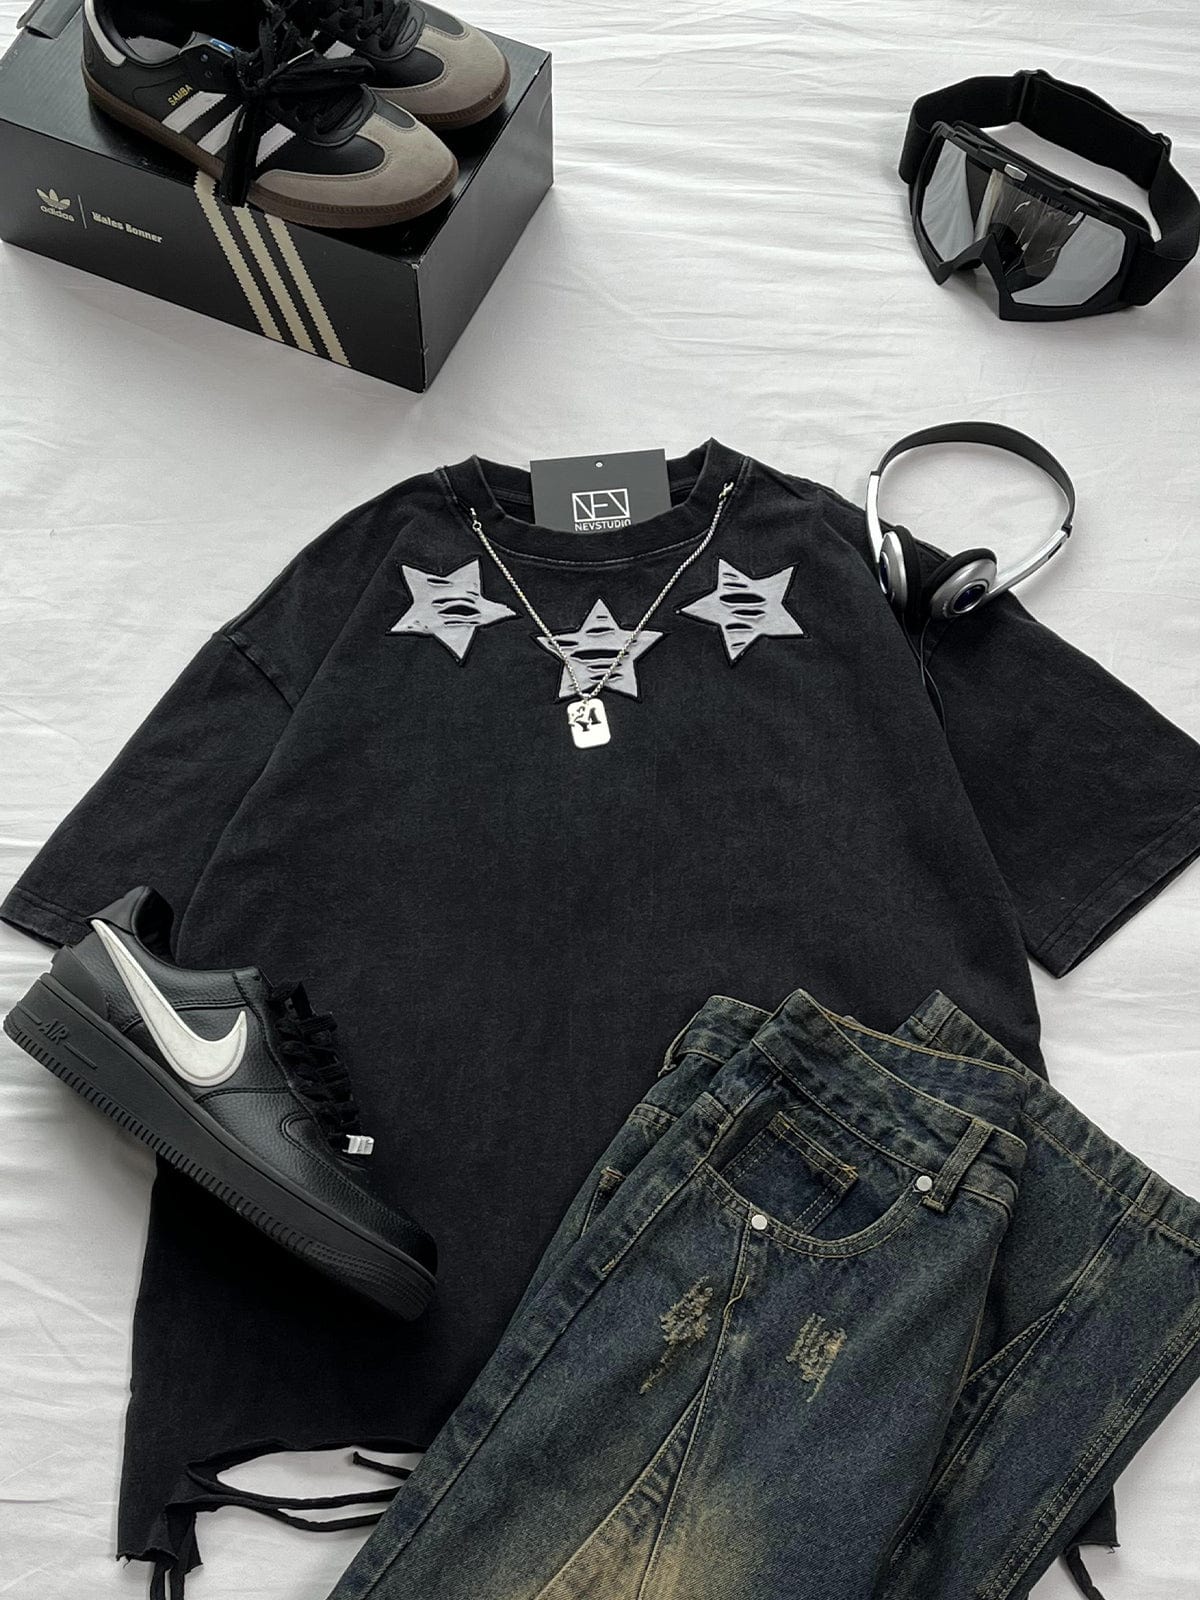 NEV Embroidery Distressed Star Washed Tee